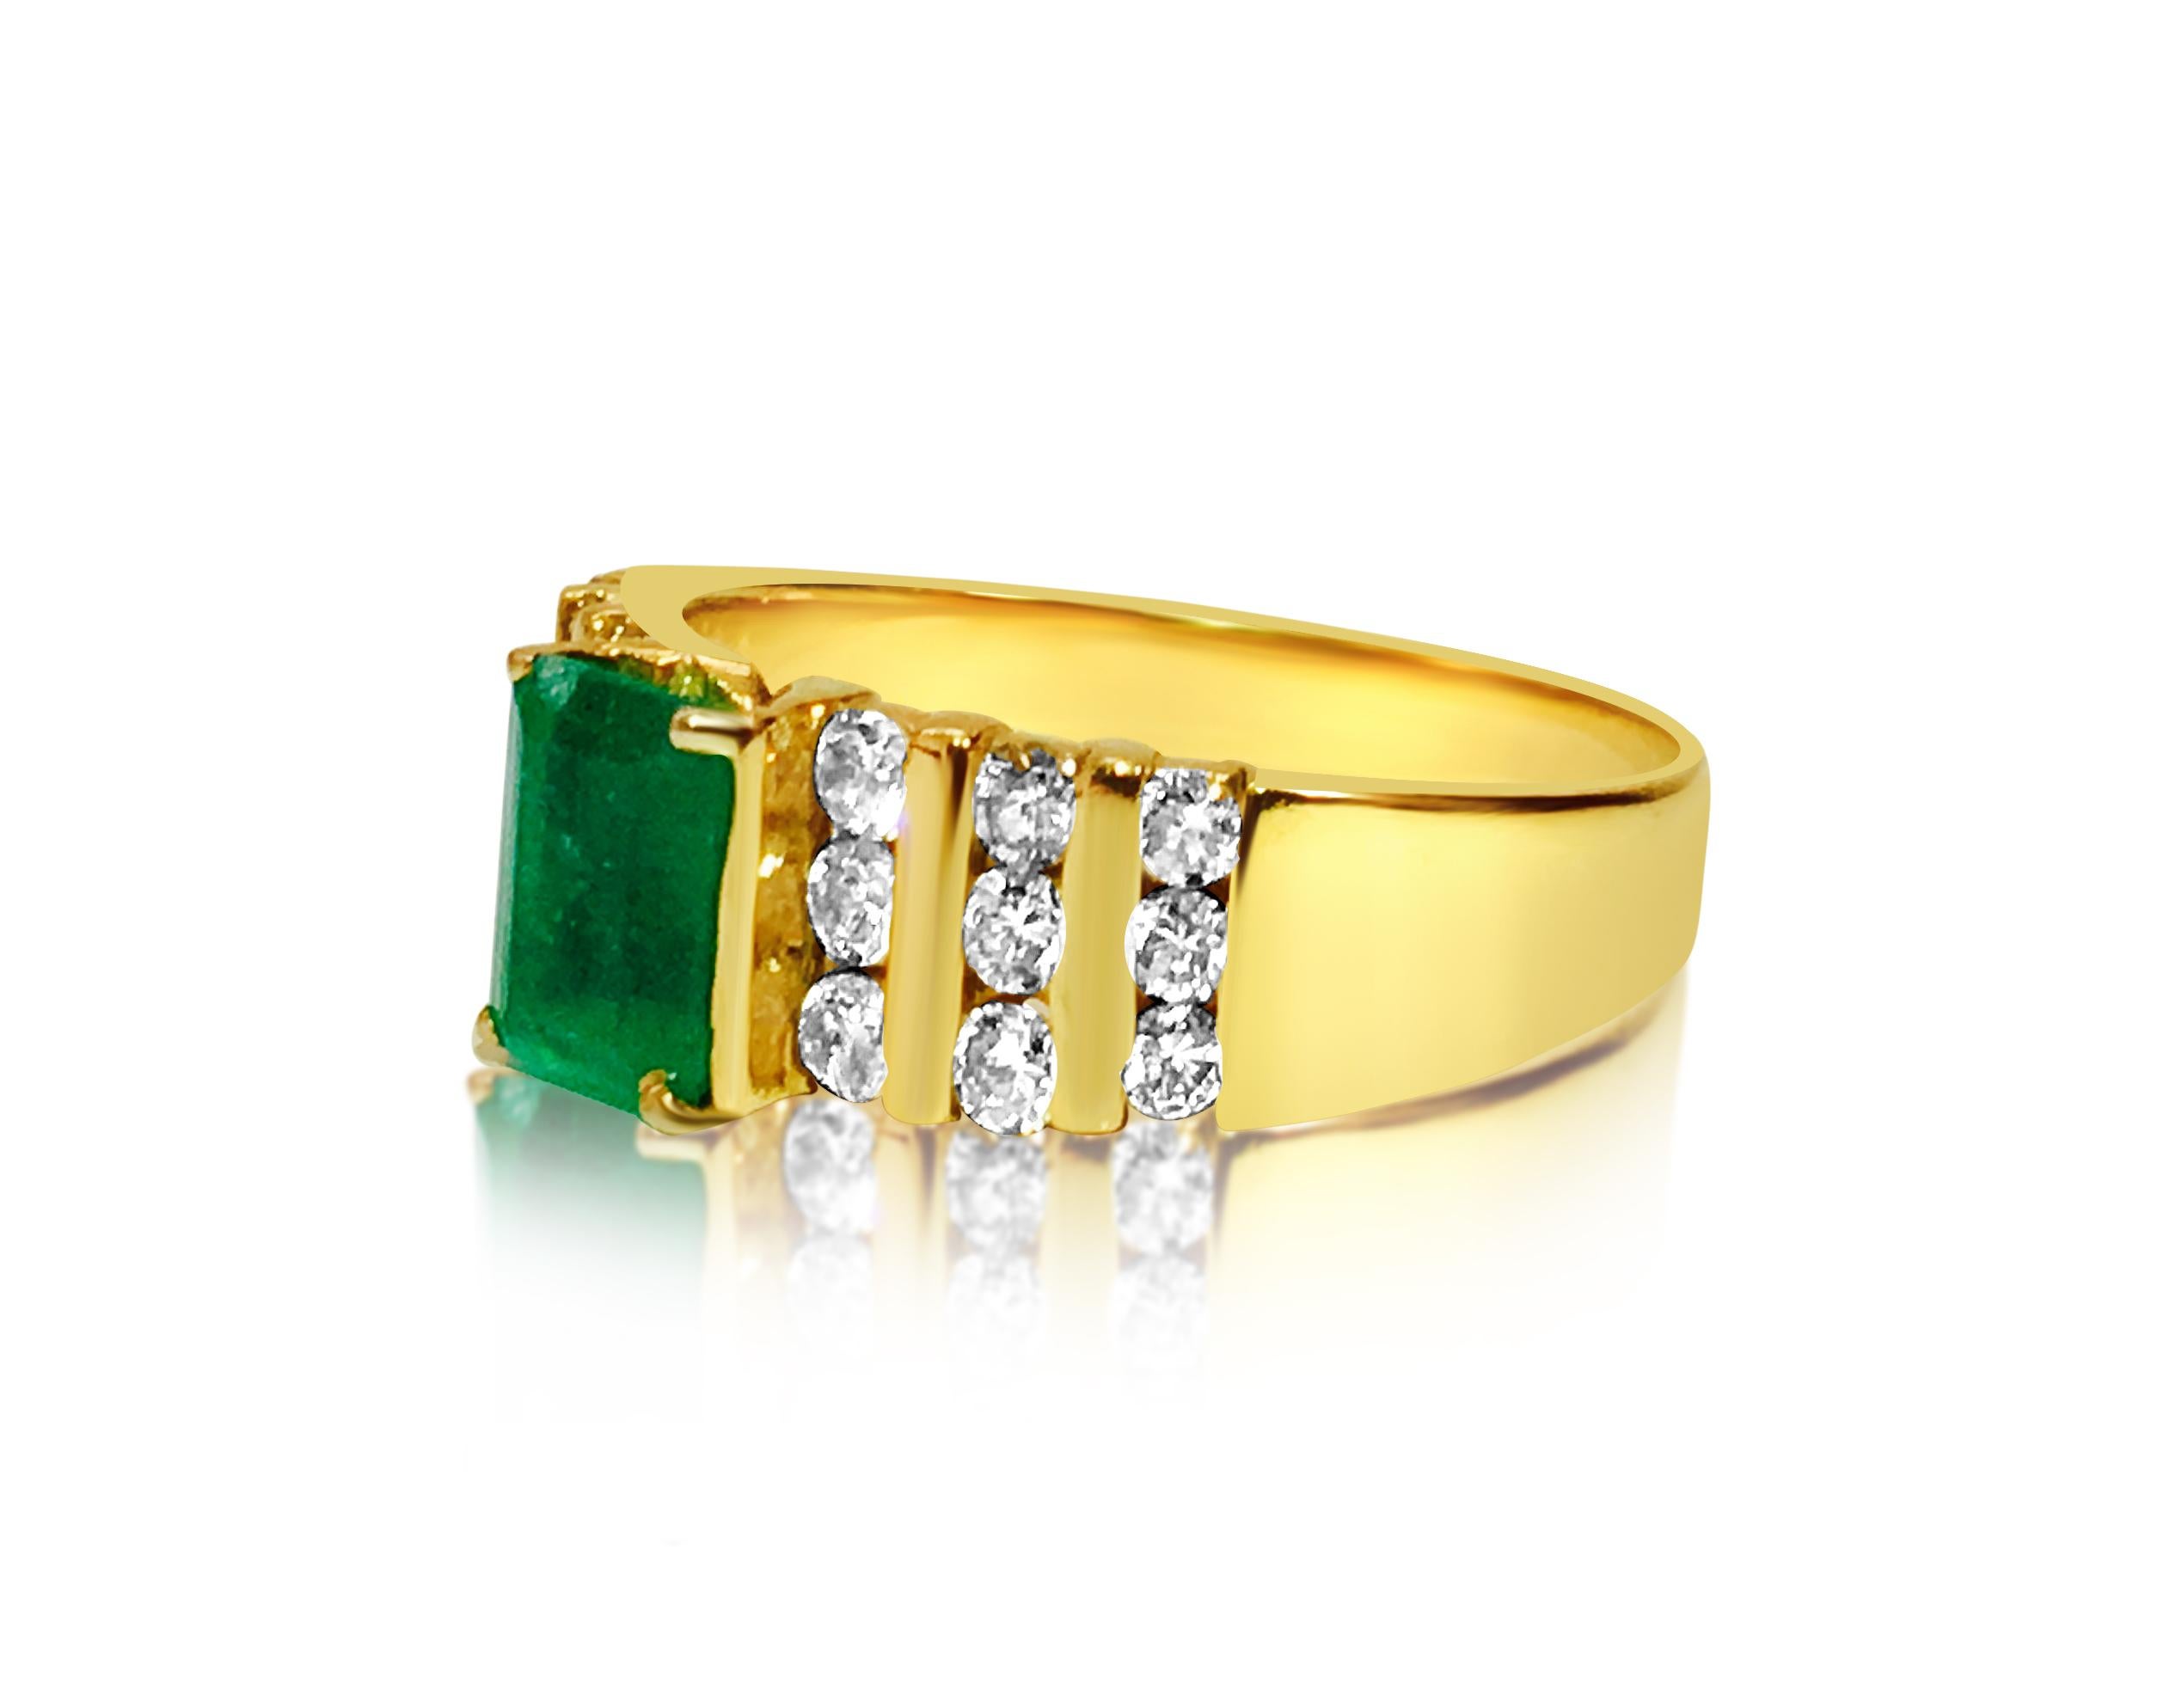 Metal: 14k yellow gold. 
0.60 carat diamonds, SI clarity and G color, round brilliant cut diamonds, set in channel setting. 

2.10 carat emerald. Shape: emerald cut set in prongs. 100% natural earth mined emerald.

Total carat weight of all